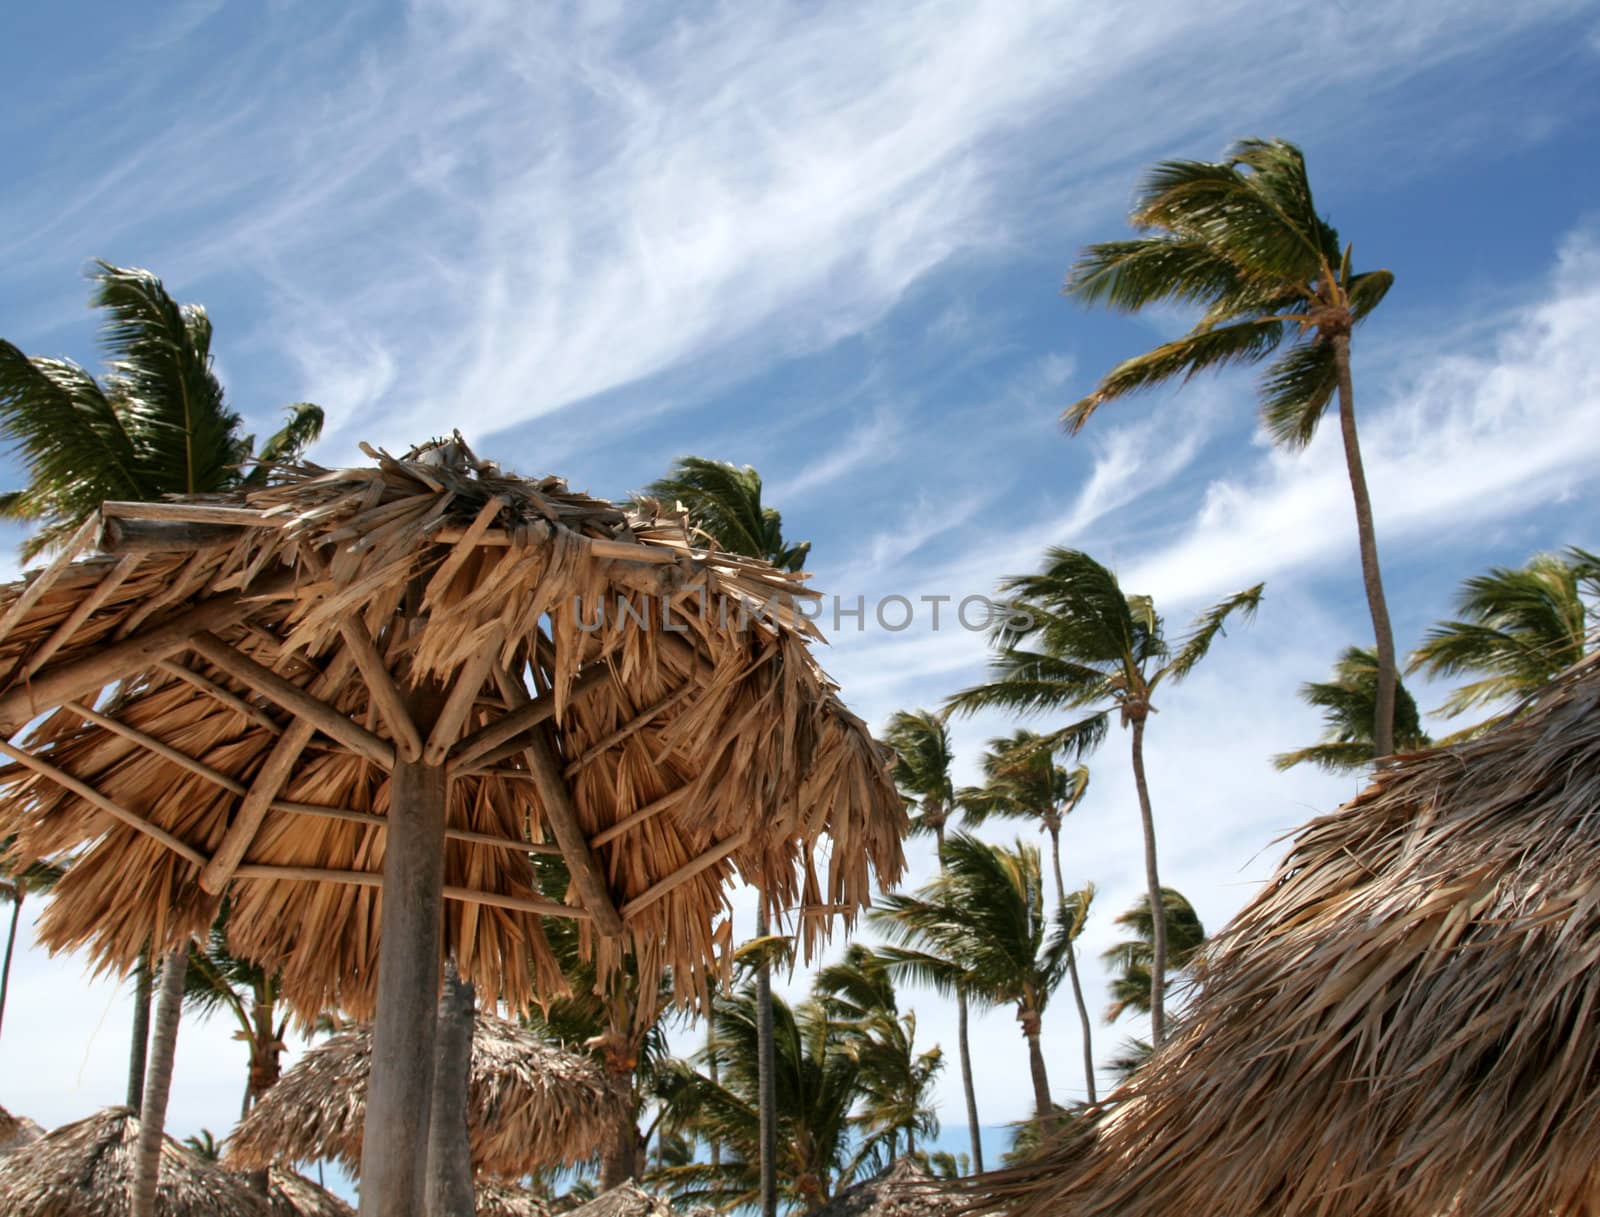 Beach huts and palm trees on the beach at Punta Cana, Dominican Republic.